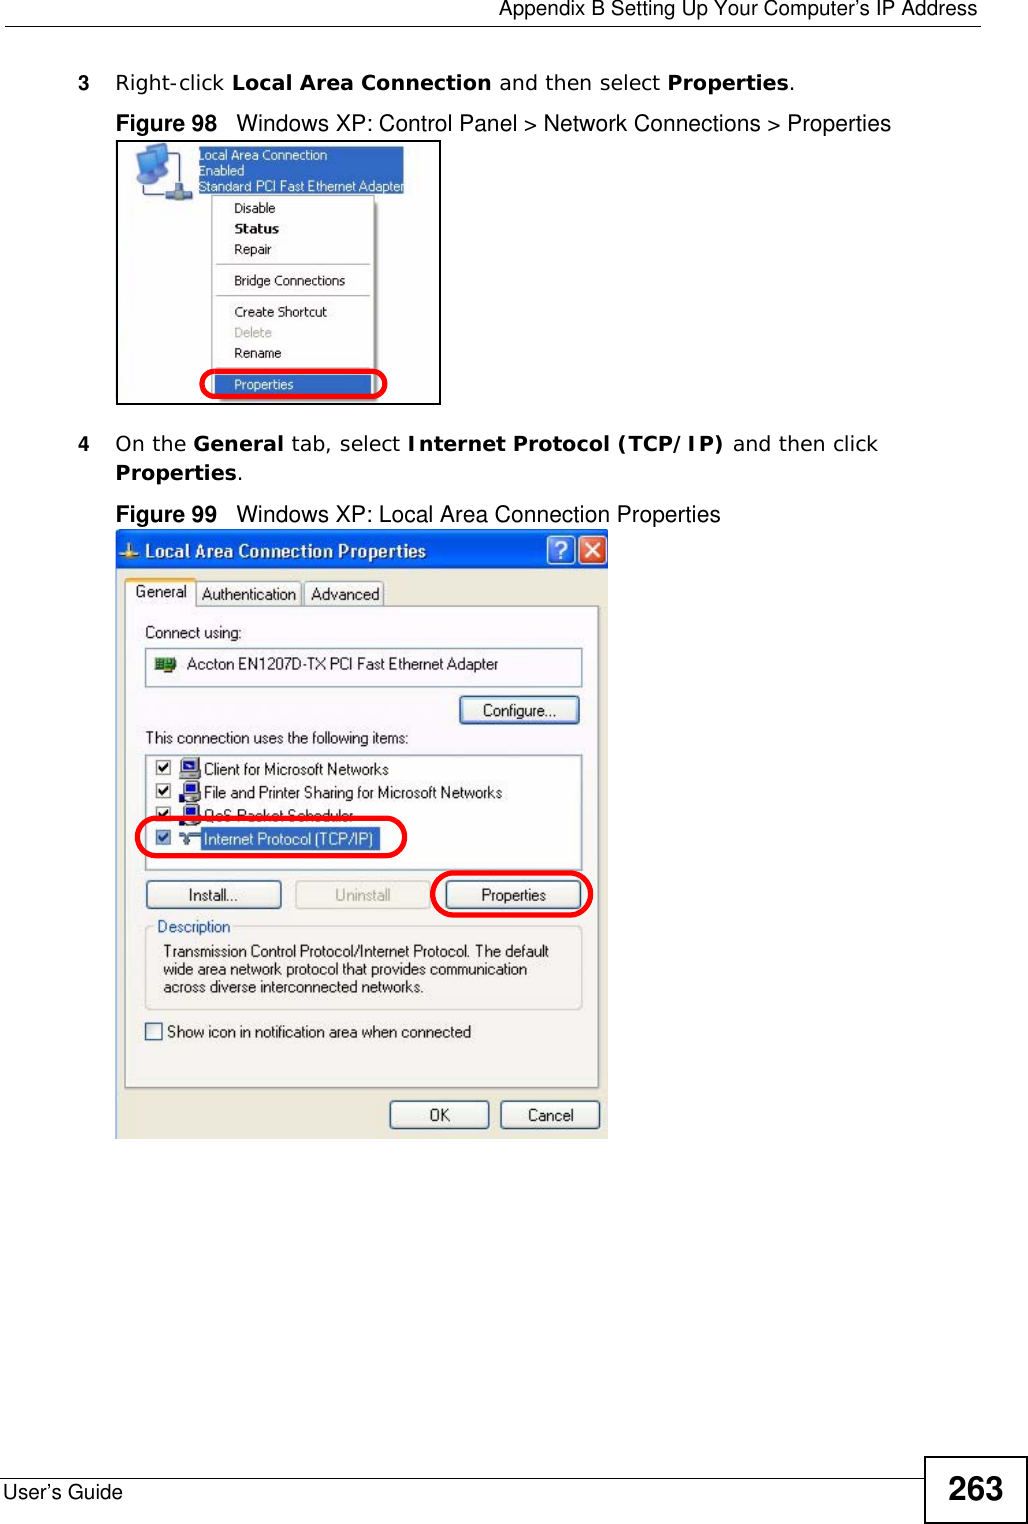  Appendix B Setting Up Your Computer’s IP AddressUser’s Guide 2633Right-click Local Area Connection and then select Properties.Figure 98   Windows XP: Control Panel &gt; Network Connections &gt; Properties4On the General tab, select Internet Protocol (TCP/IP) and then click Properties.Figure 99   Windows XP: Local Area Connection Properties